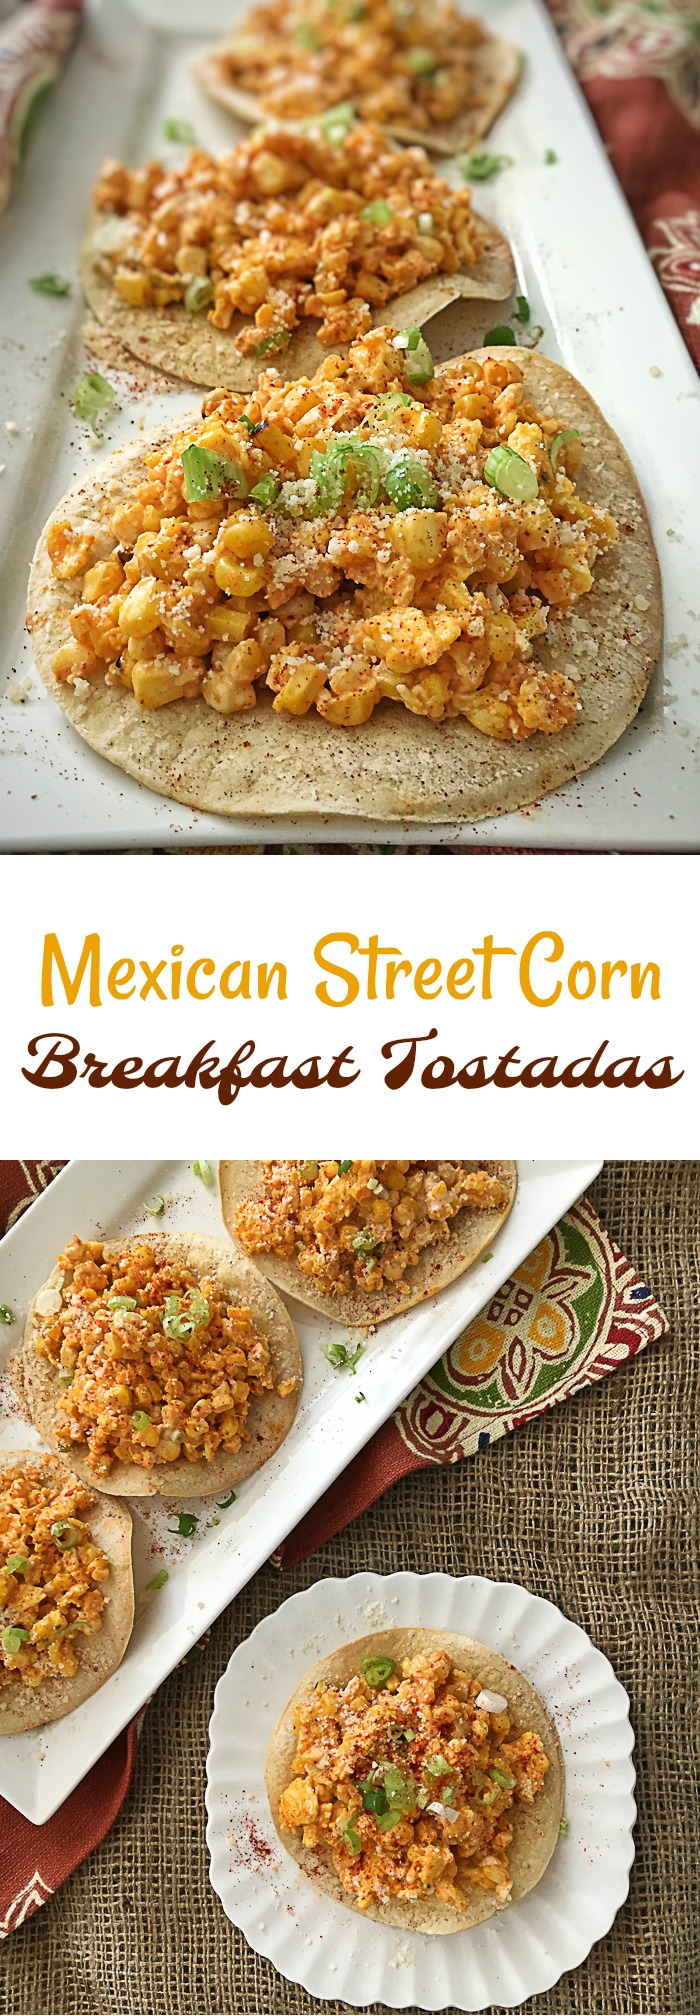 The famous grilled Mexican street corn meets eggs and tortillas in this breakfast mash-up recipe. Recipe at TeaspoonofSpice.com